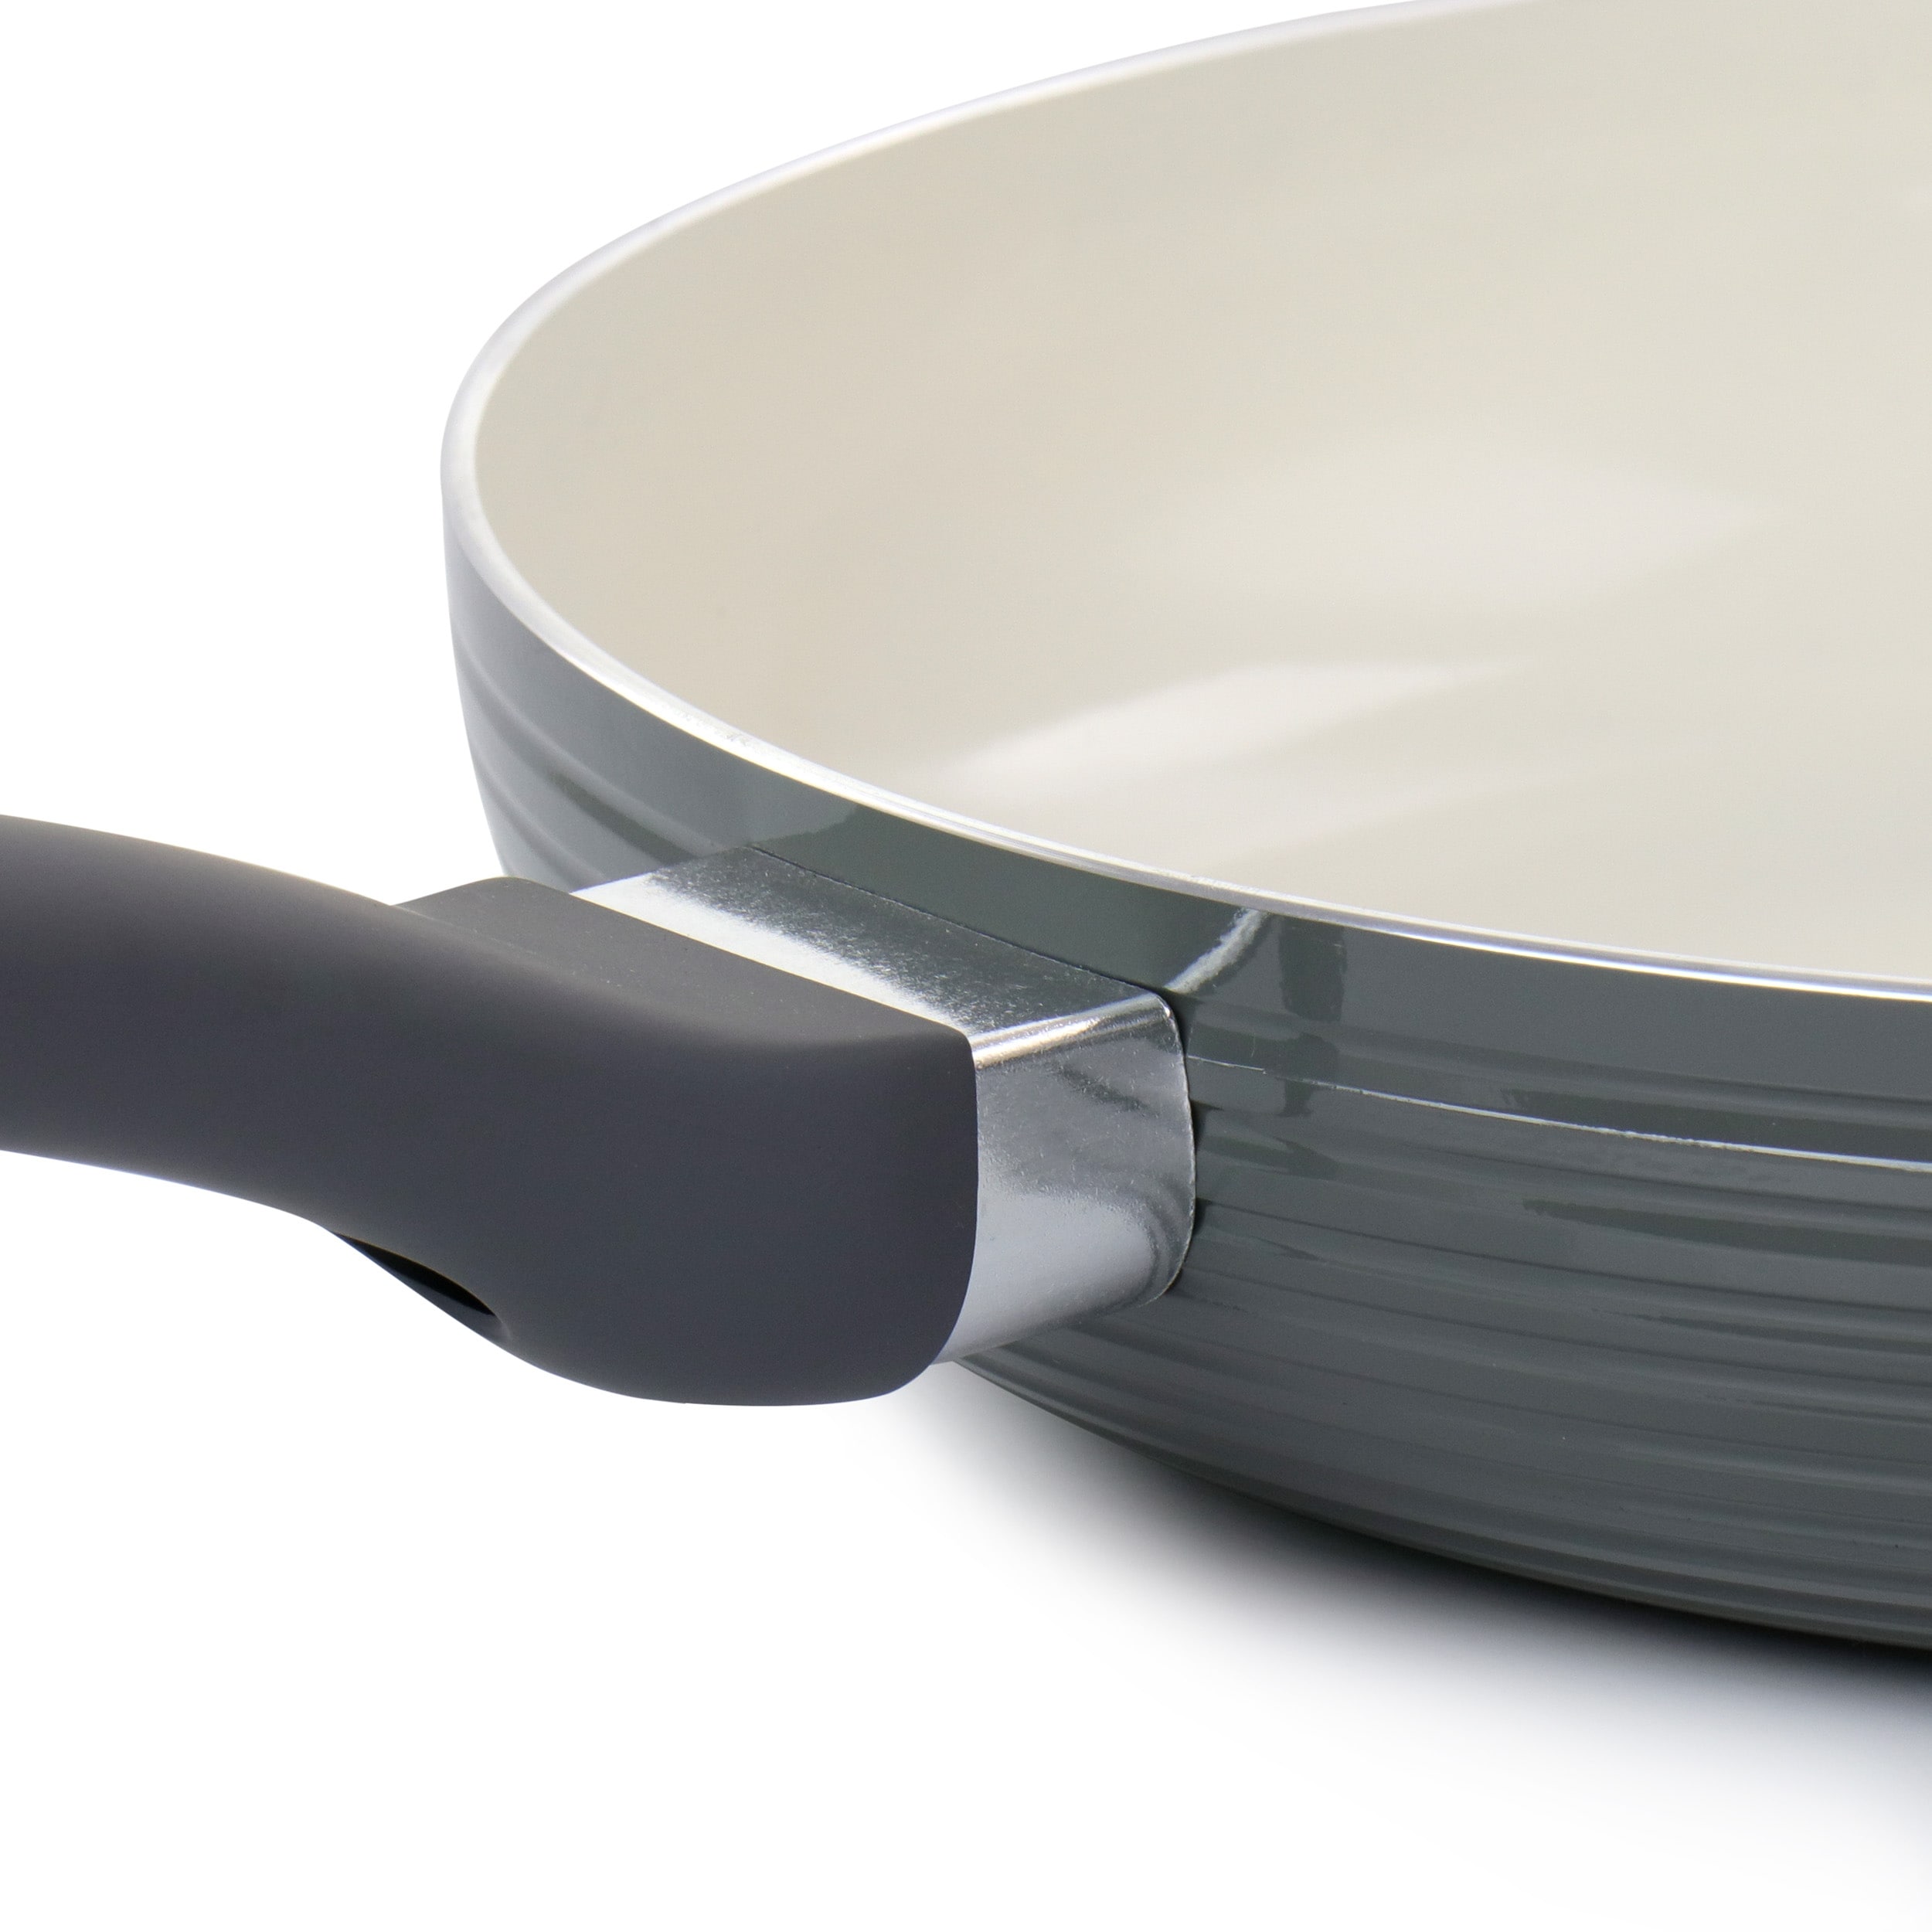 https://ak1.ostkcdn.com/images/products/is/images/direct/bc67370c6df036bf2030c32a5ebdc222fb04849b/Oster-Ridge-Valley-12-Inch-Aluminum-Nonstick-Frying-Pan-in-Grey.jpg